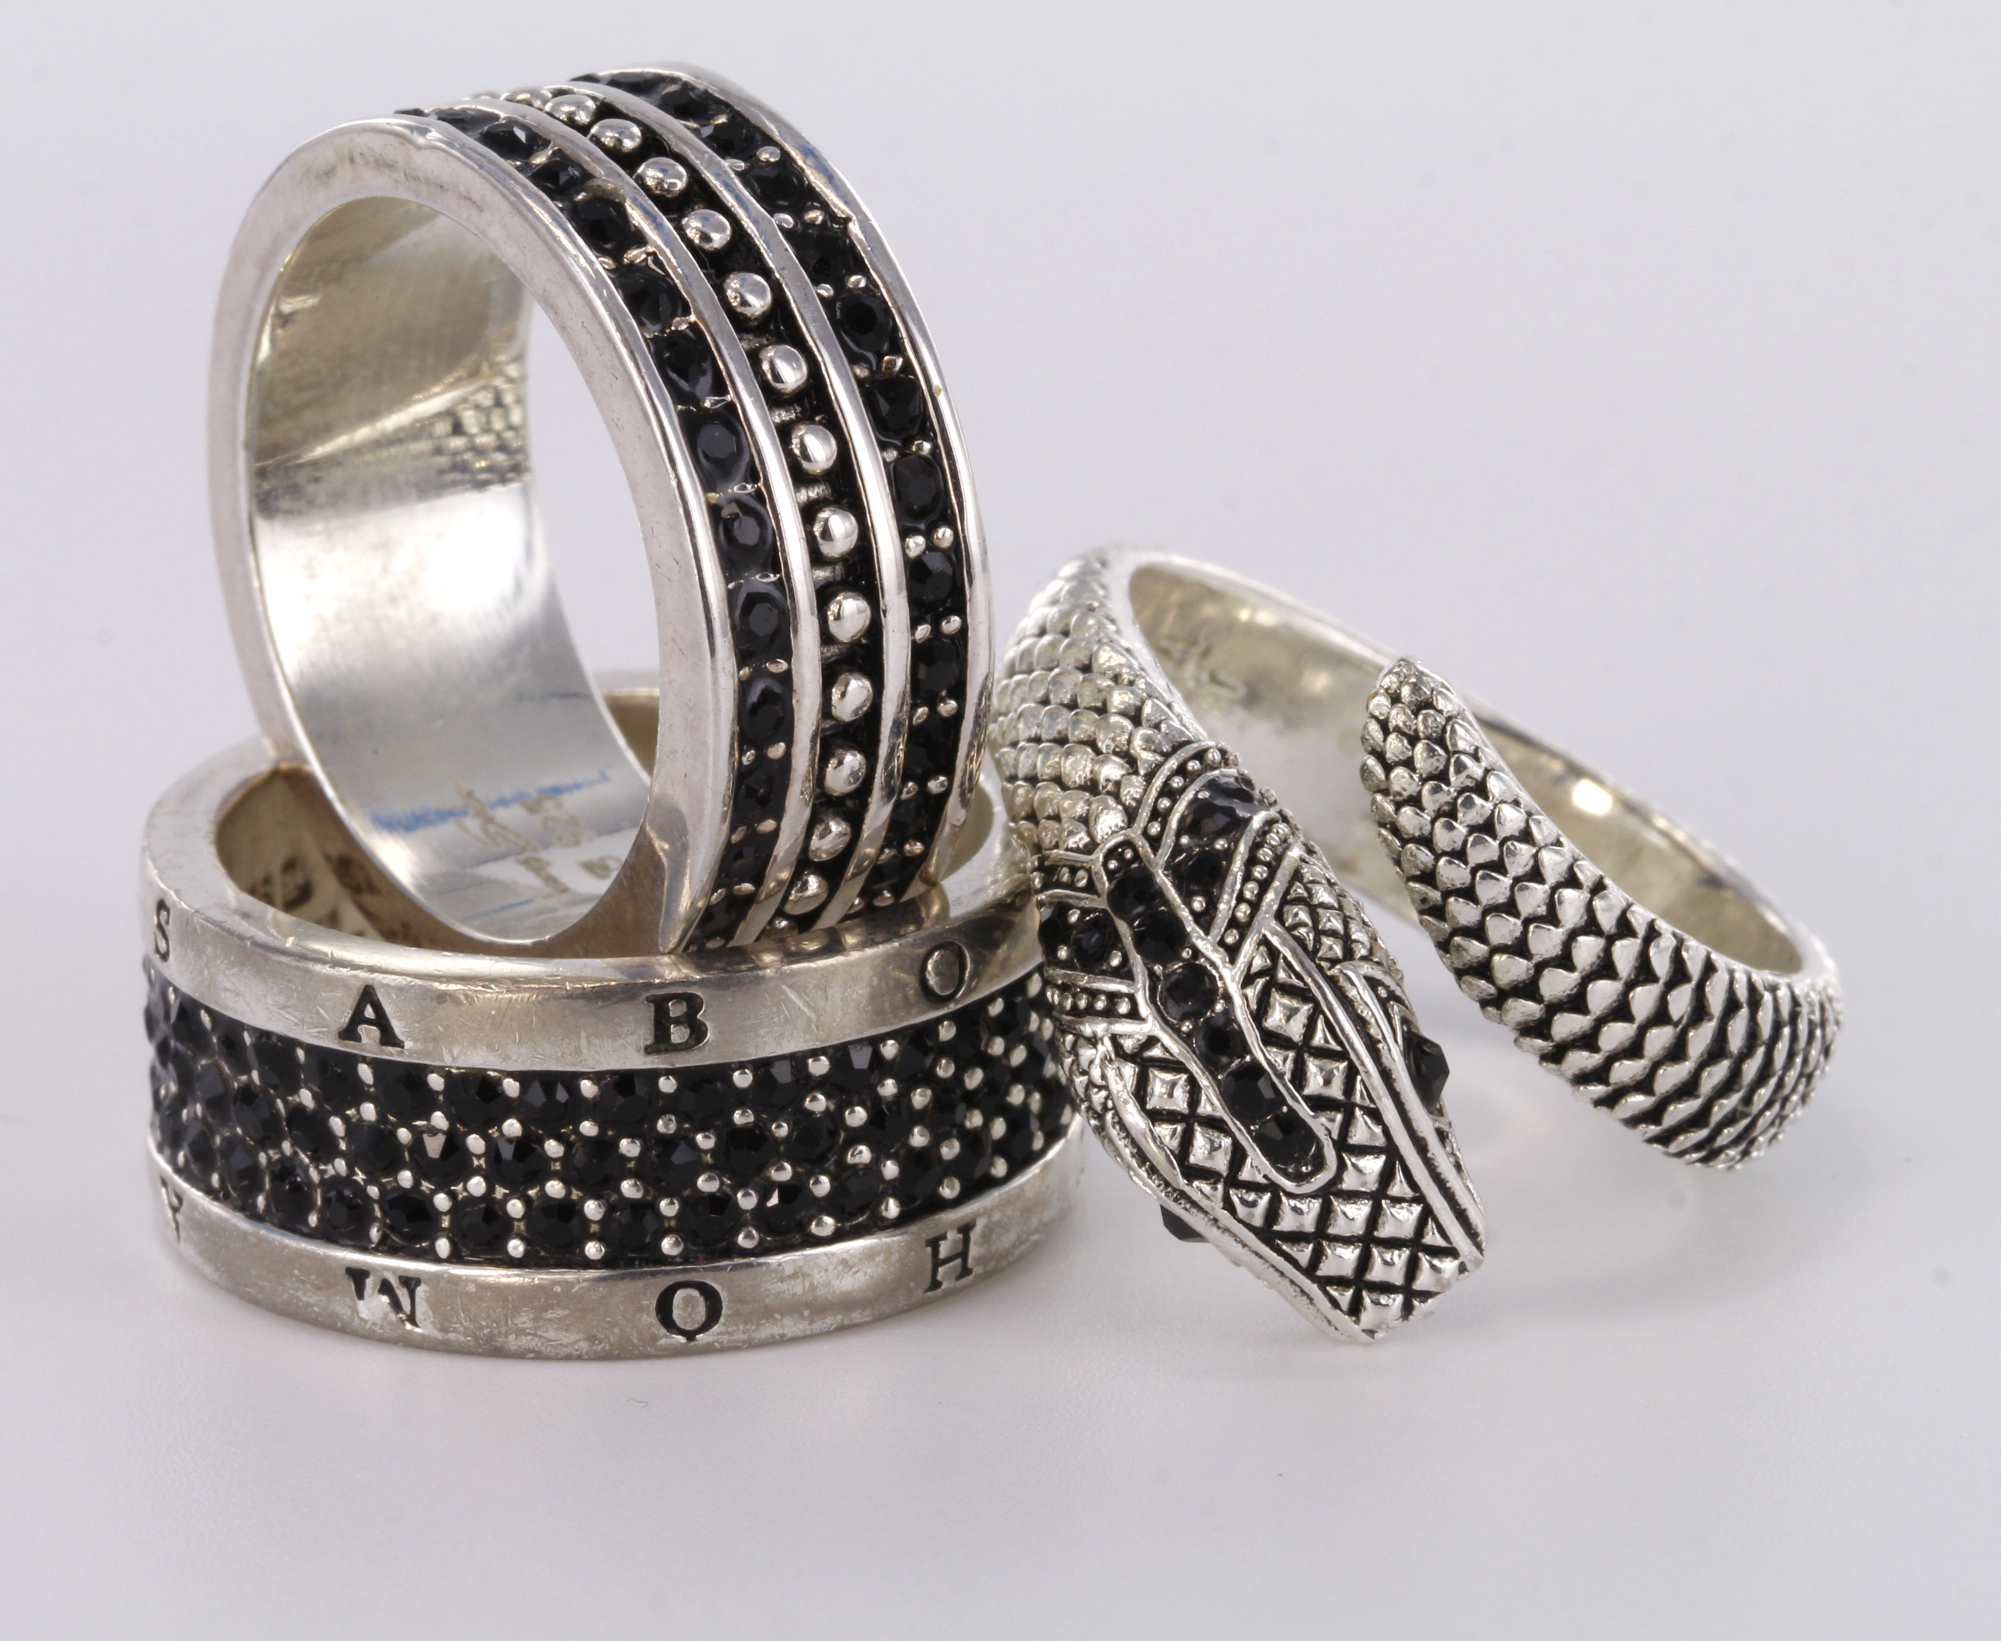 Three silver rings by designer Thomas Sabo, all set with black cz stones. Snake ring, finger size Q,